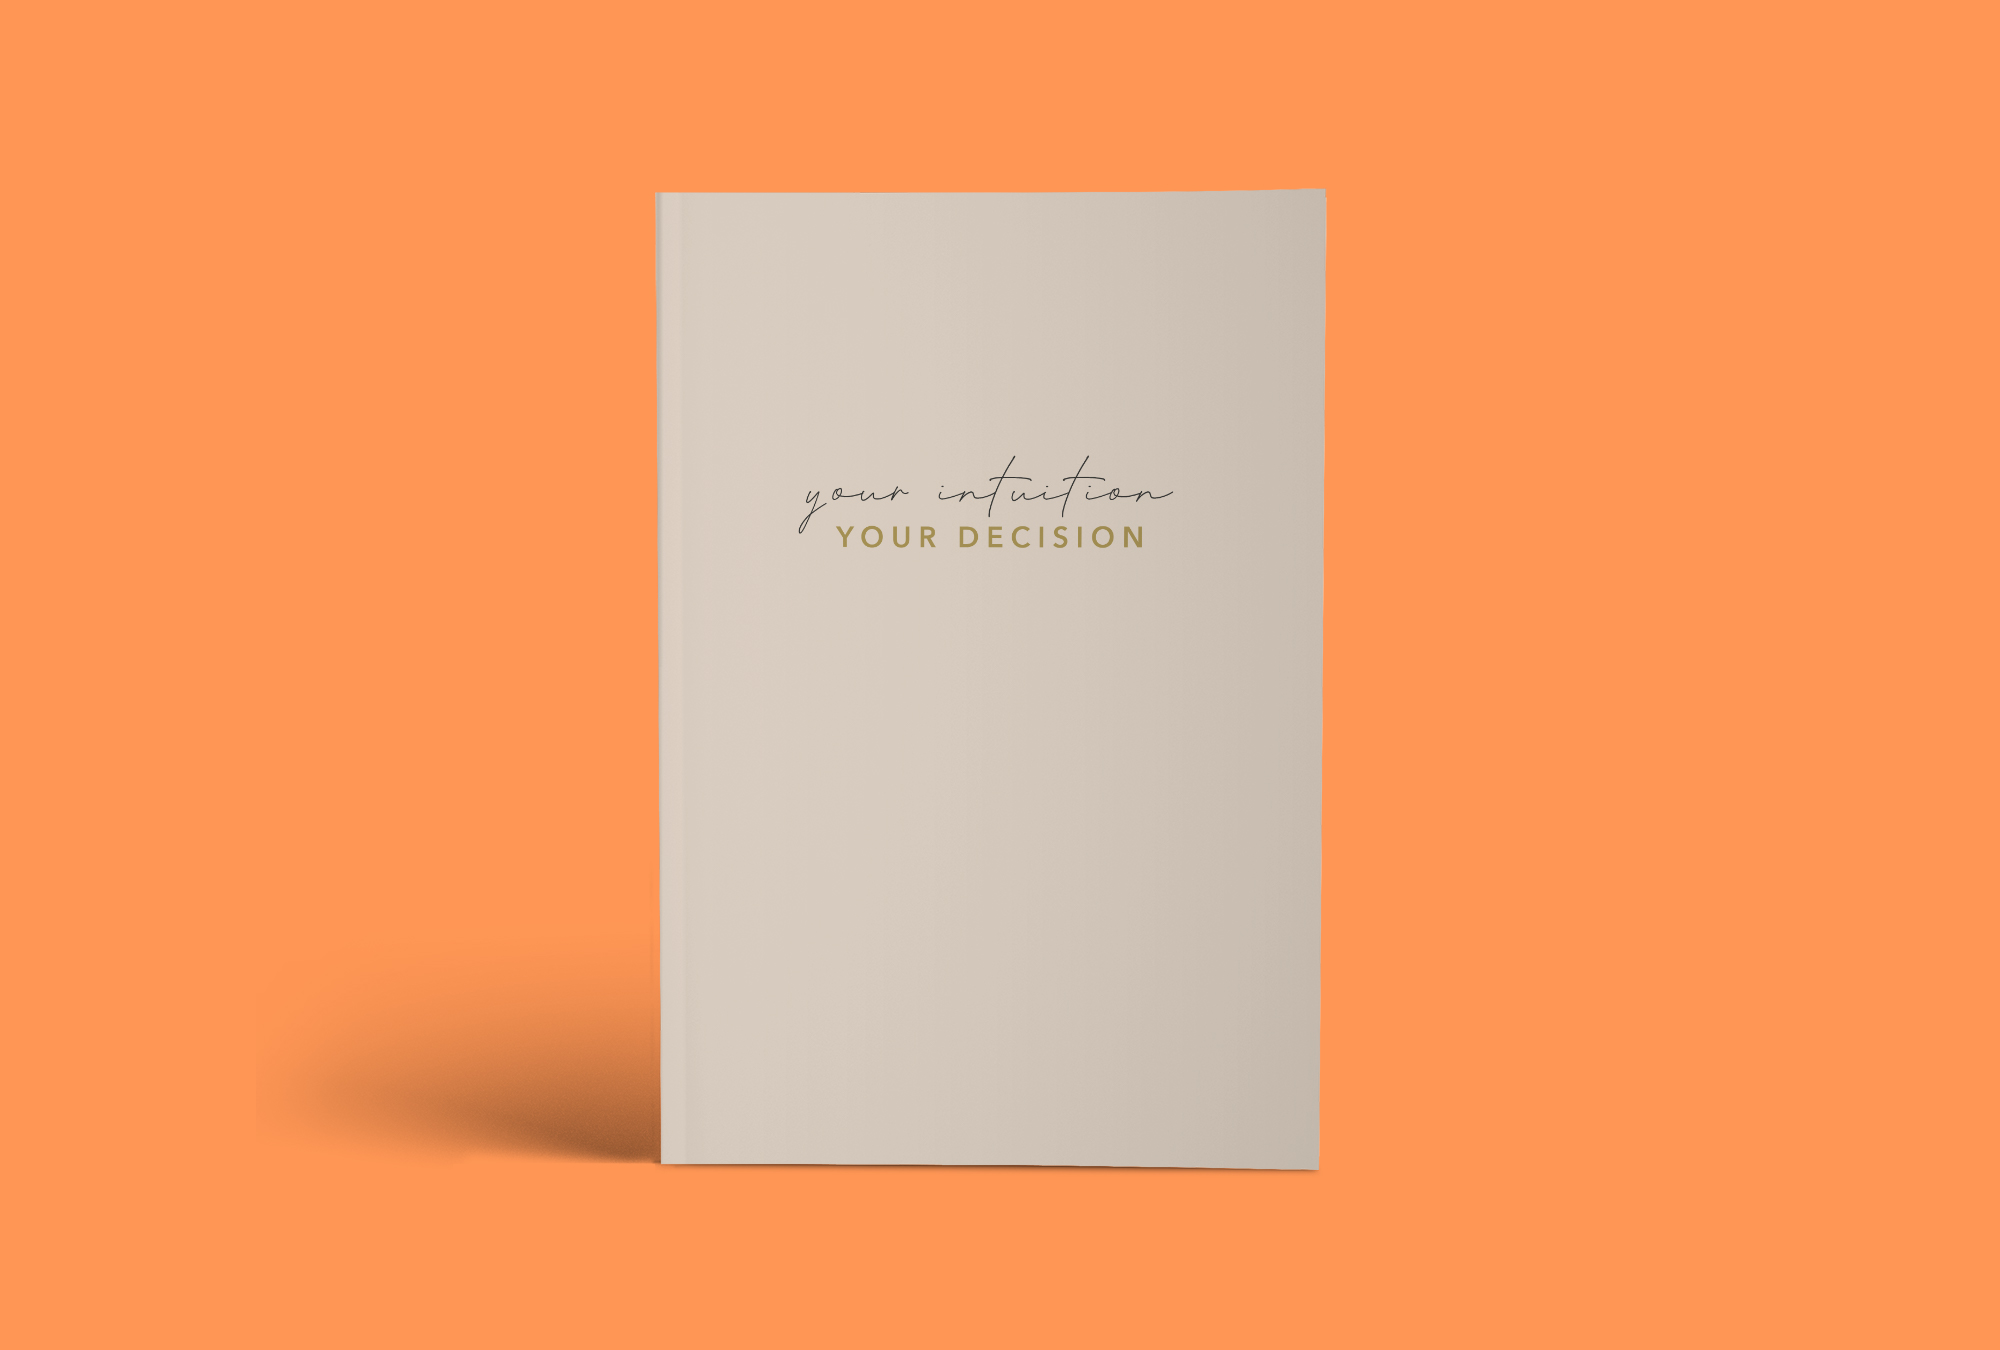 Journal "your intuition, your decision"